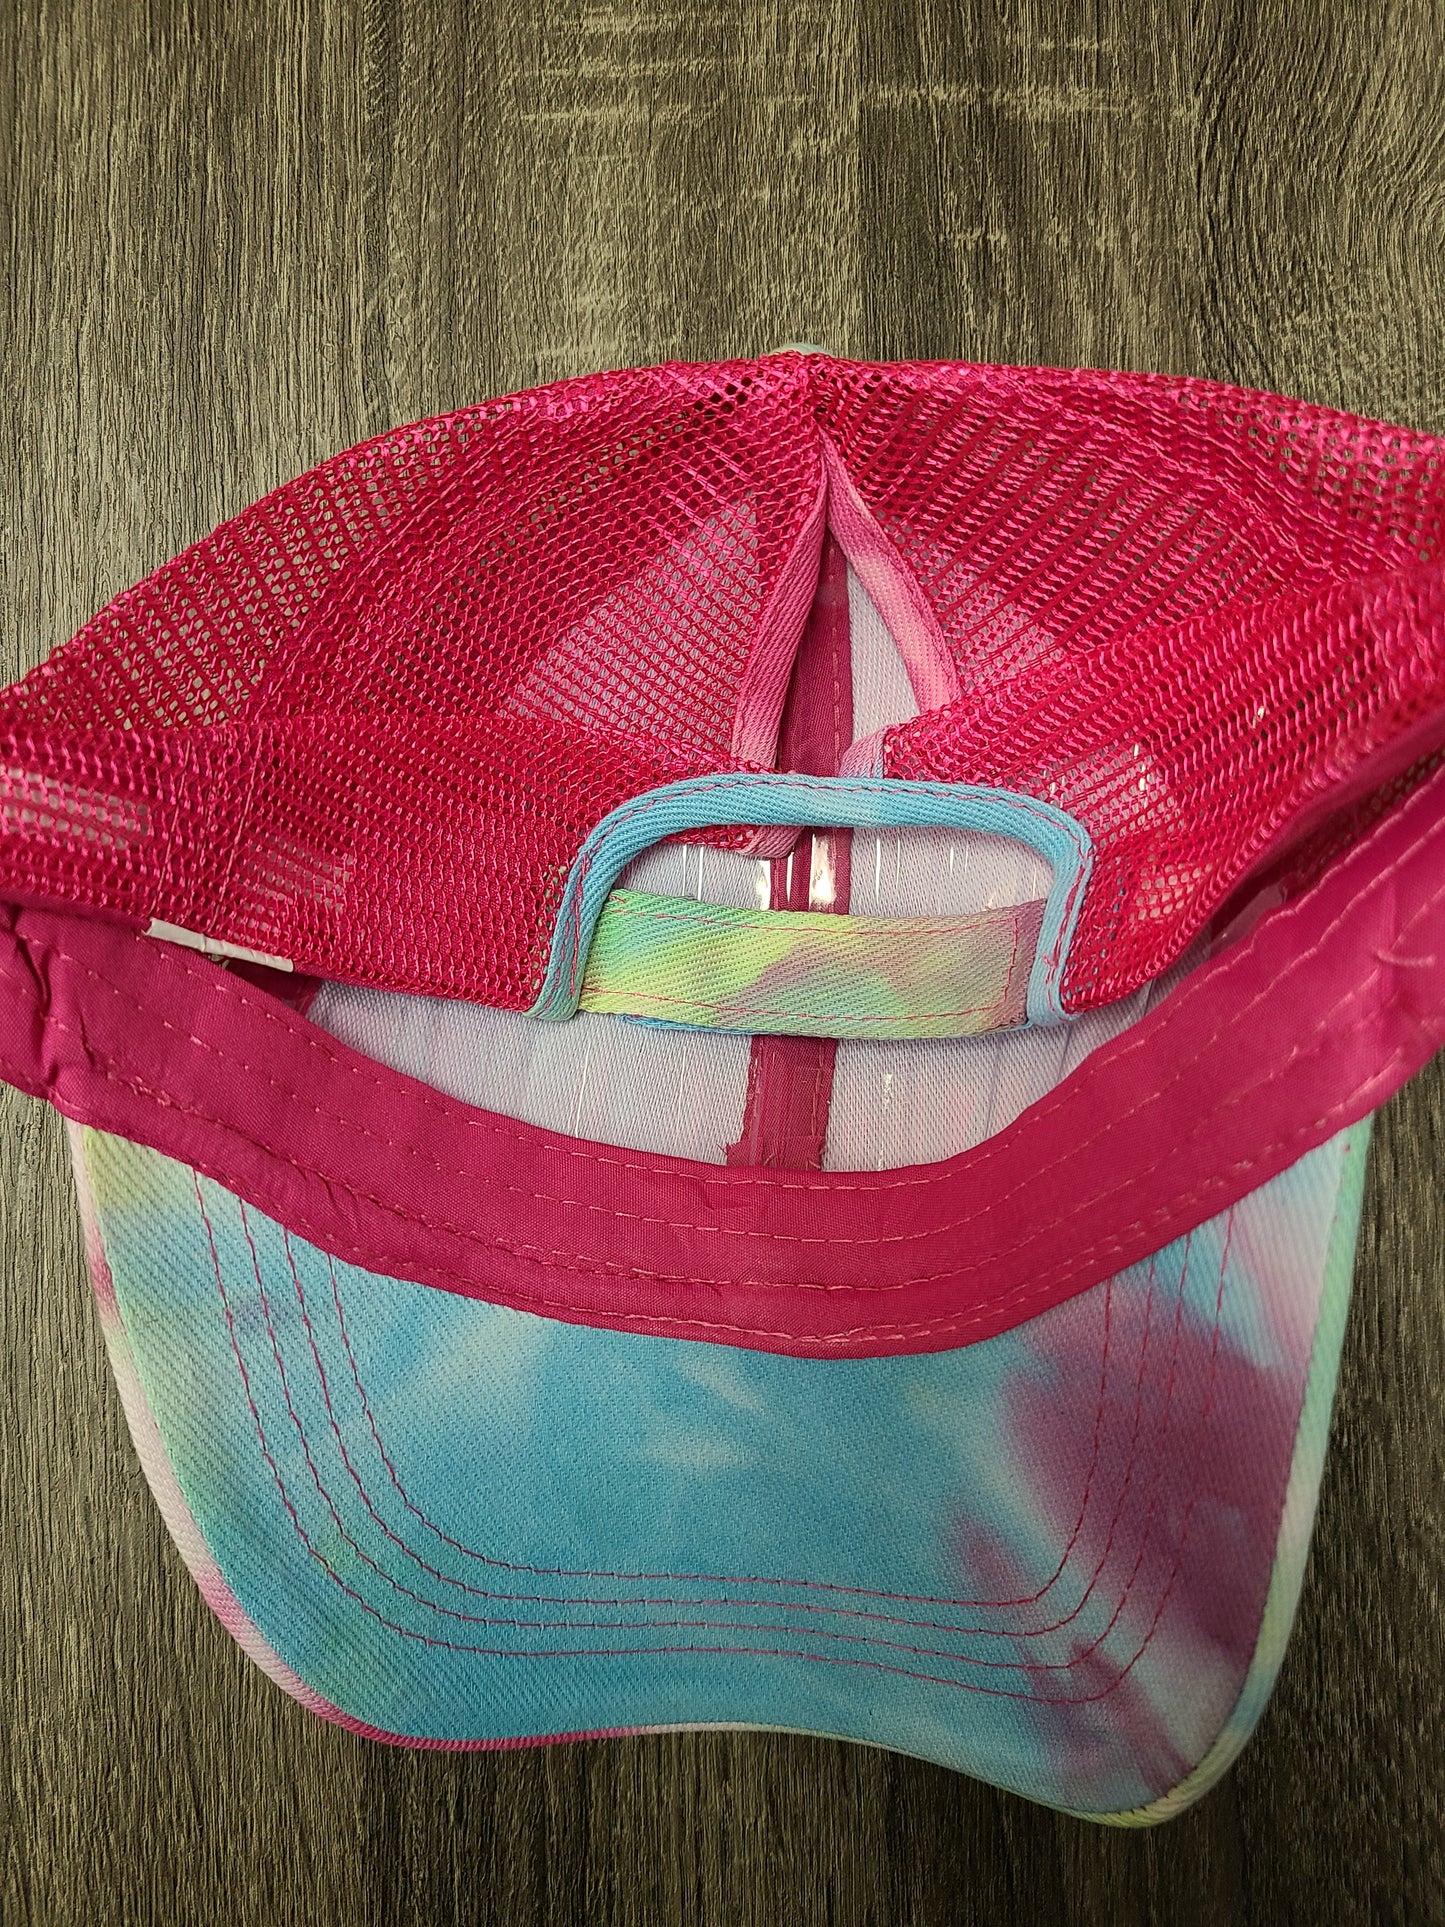 Distressed Pony Tail Hat - Tie Dye (no two are identical)